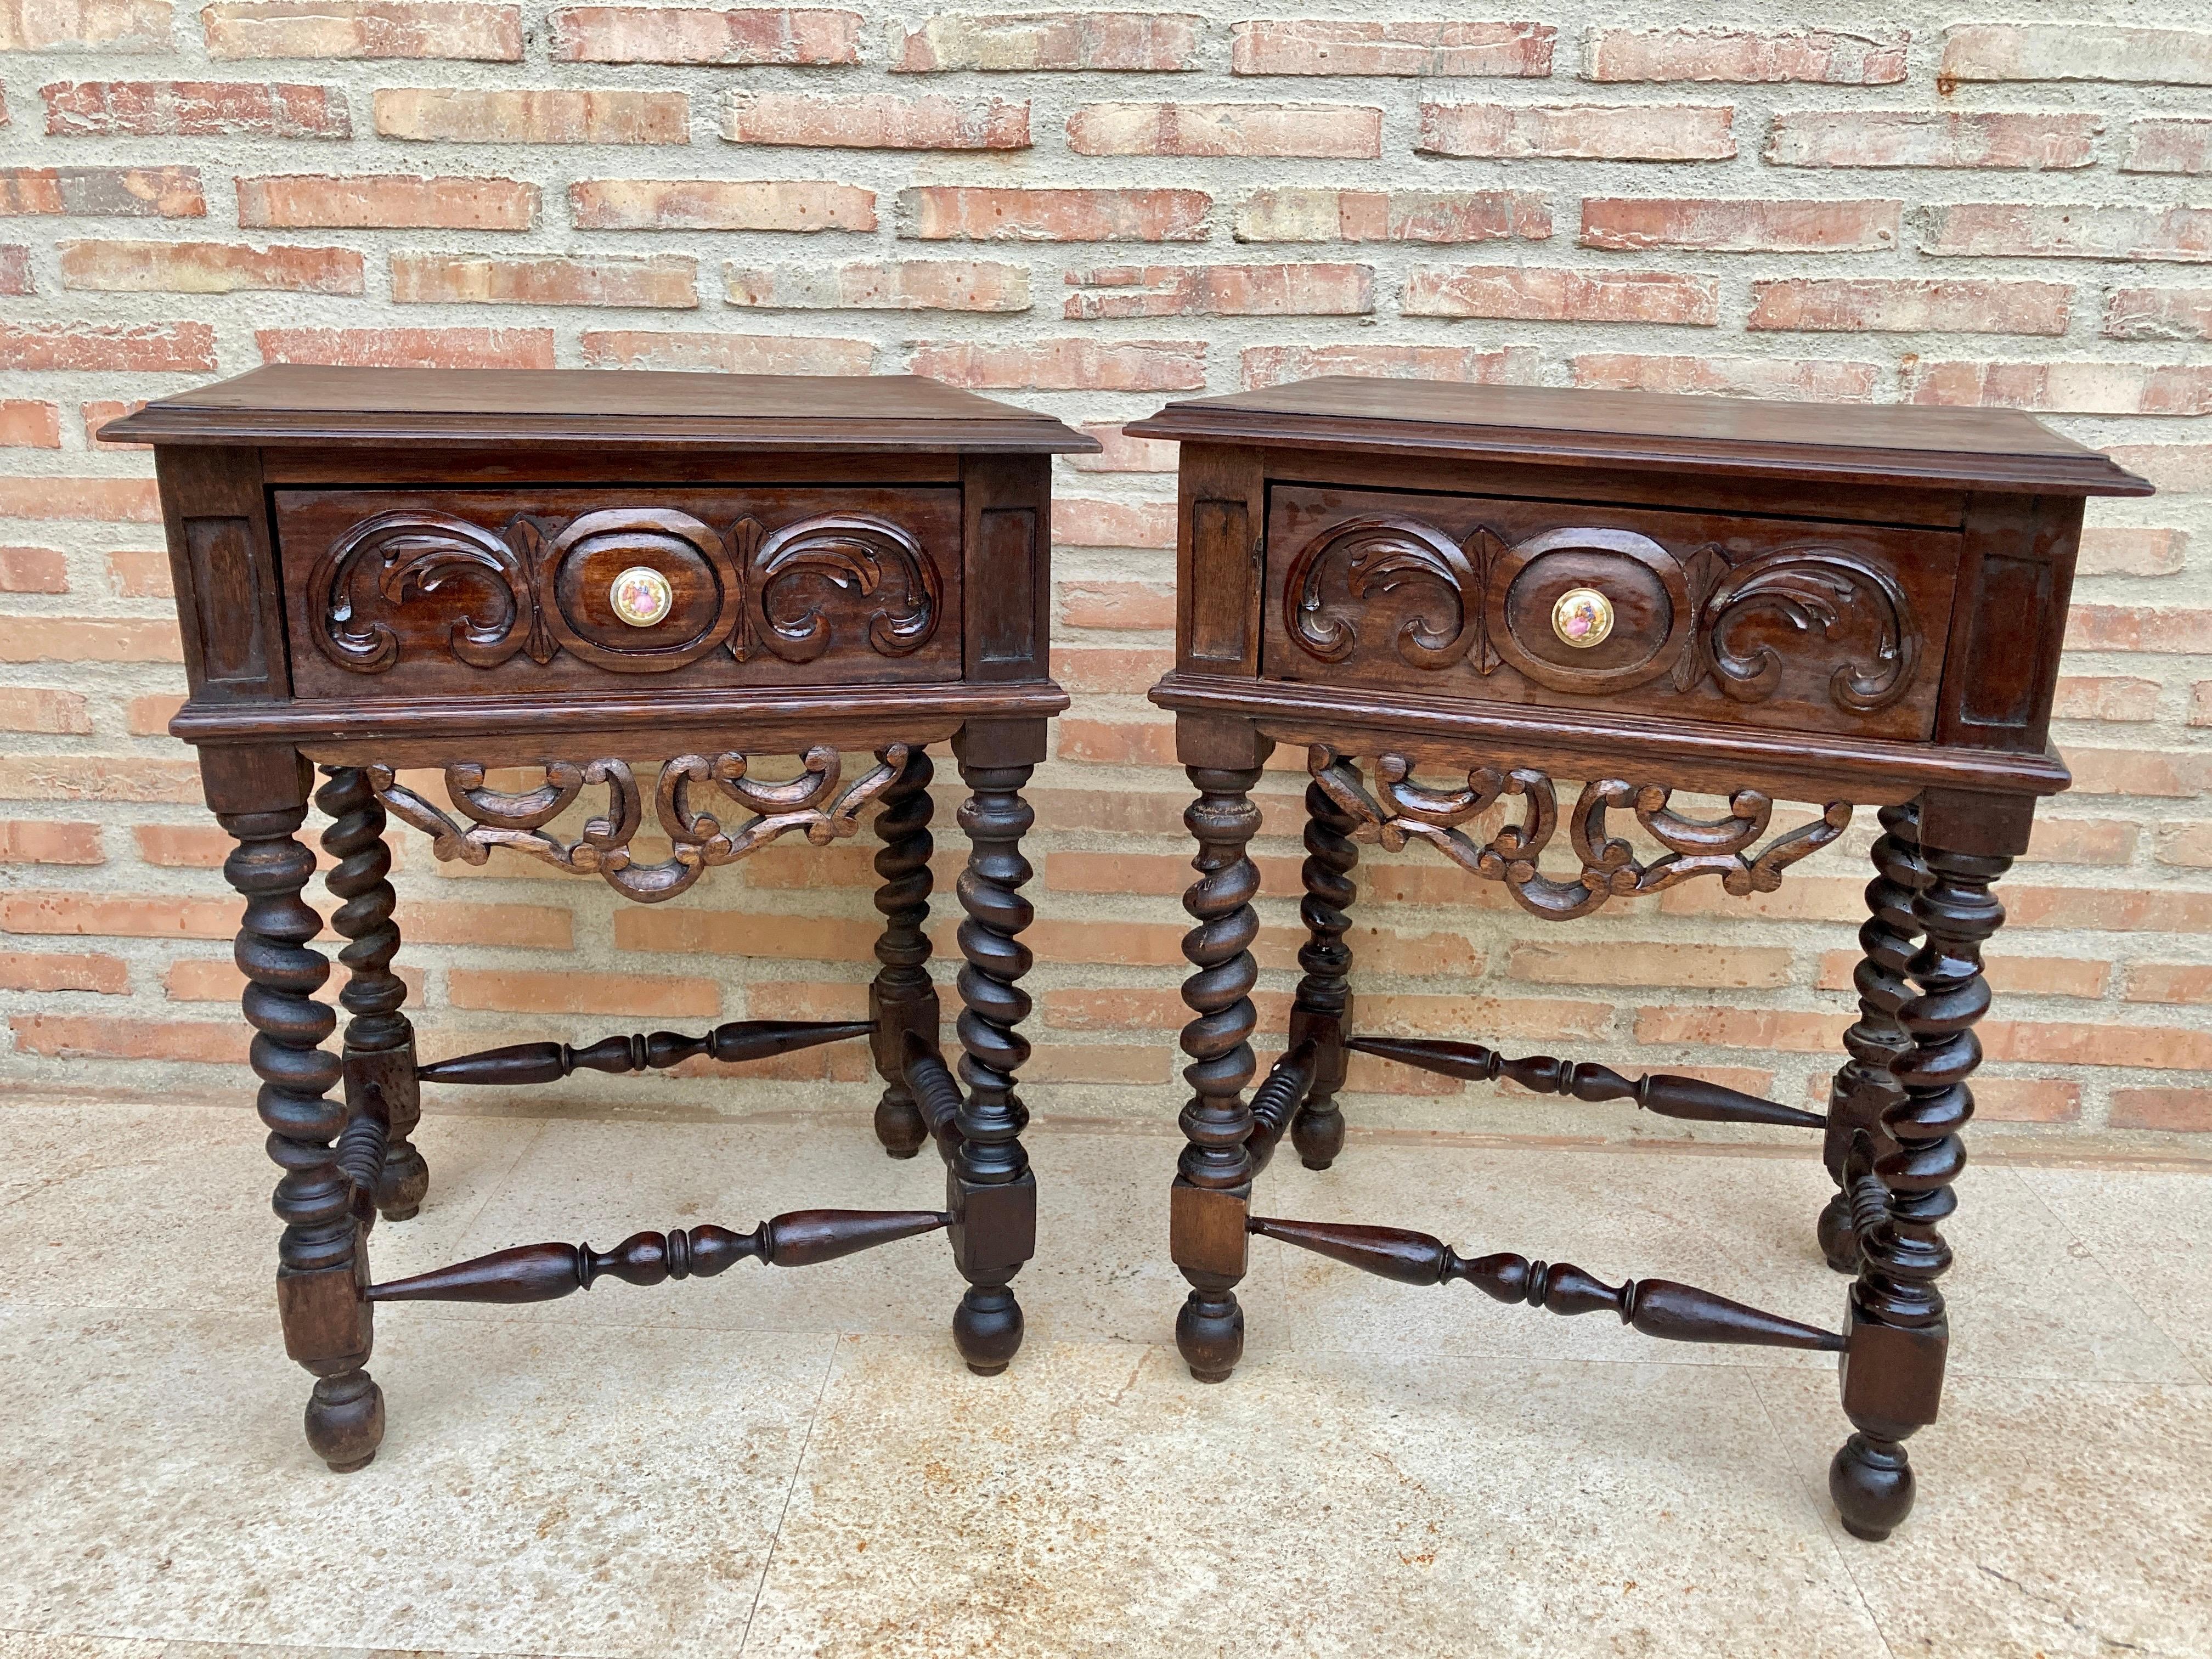 Pair of early 20th century Spanish baroque style walnut nightstands or bedside tables with one drawer and porcelain hardware. Beautiful nightstands in the Baroque style with turn legs.